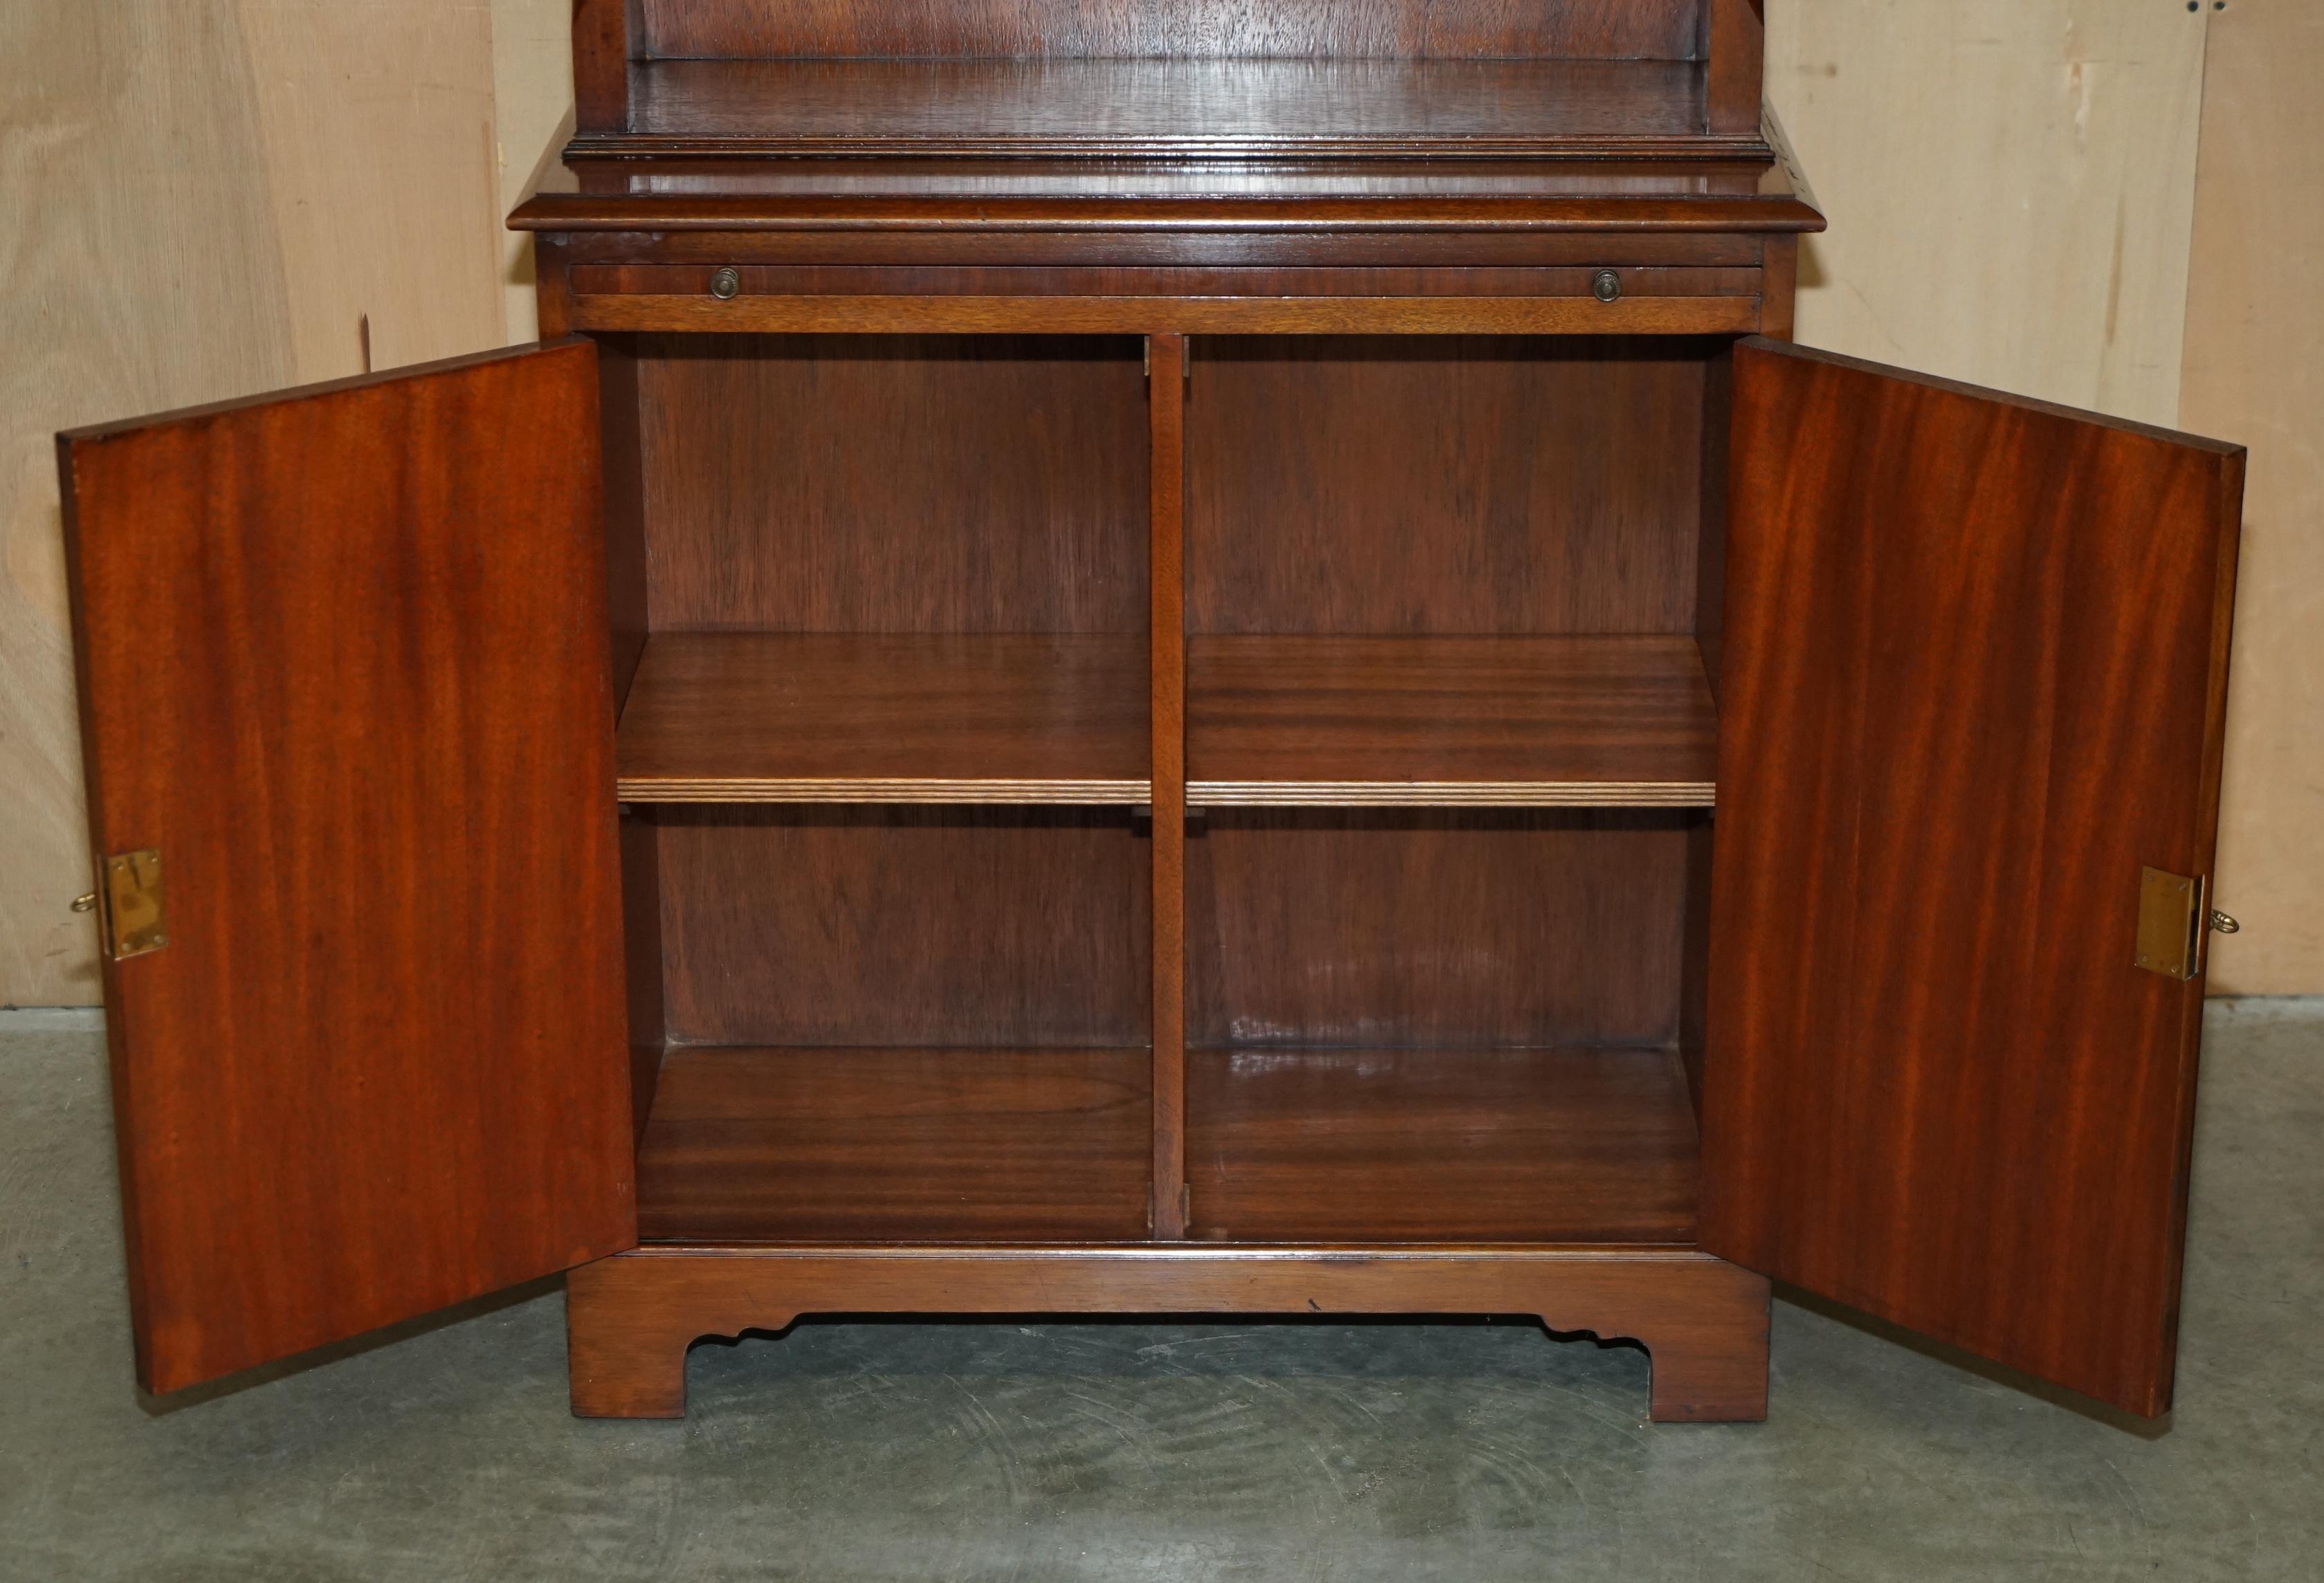 EXQUISITE PAIR OF FLAMED HARDWOOD LIBRARY BOOKCASES SLIP DRiNKS SERVING SHELVES For Sale 7